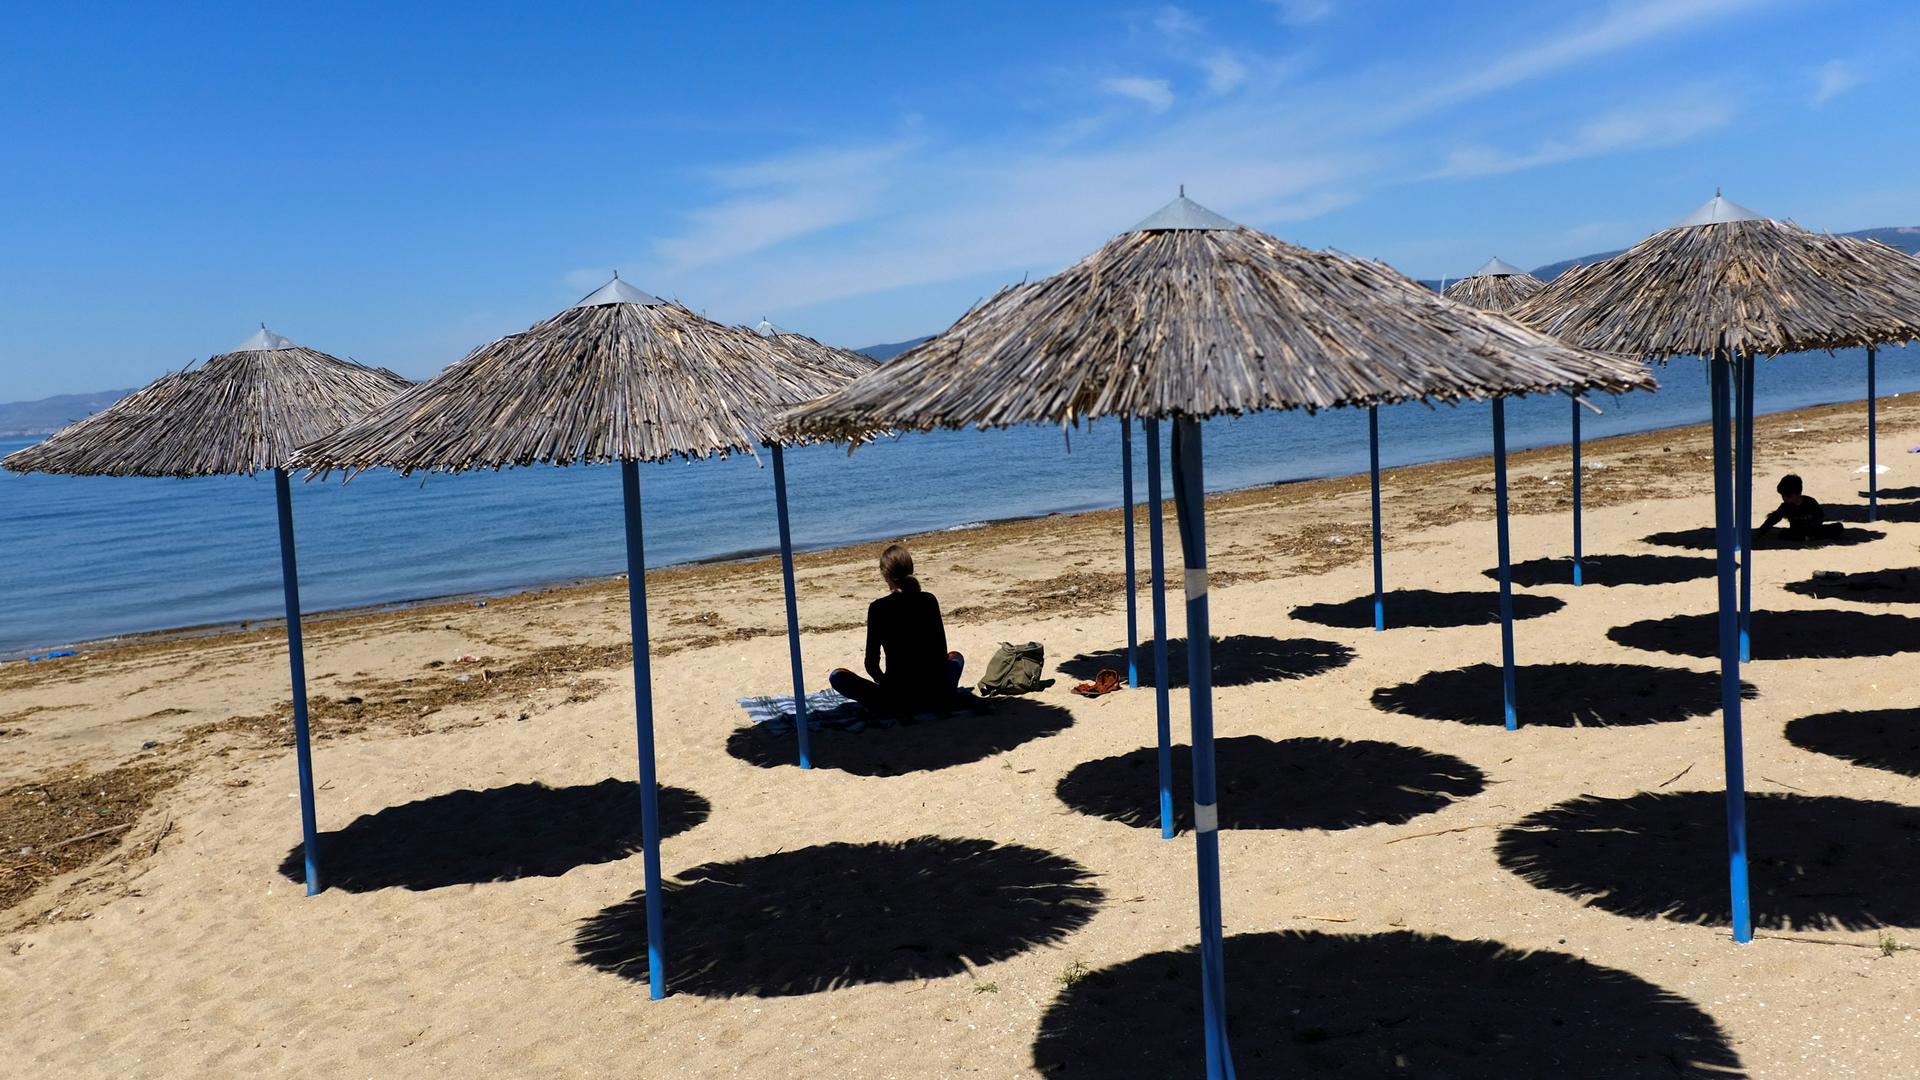 Several rows of thatch umbrellas are shown on a sandy beach with a woman in shadow sitting underneath one of the umbrellas.